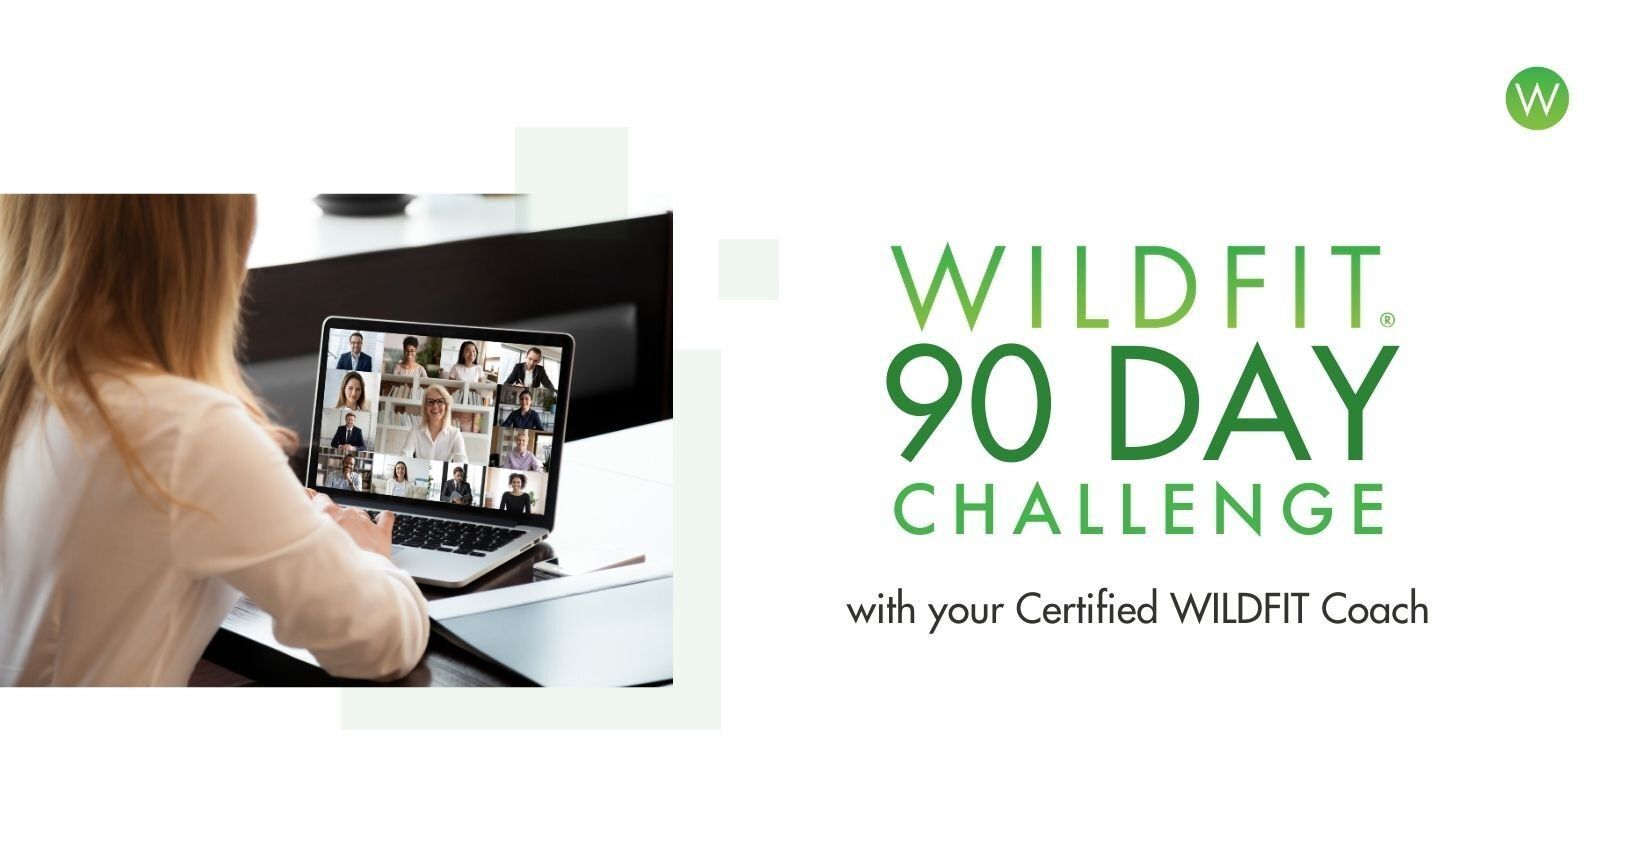 Try WildFit. Reset your relationship with food.